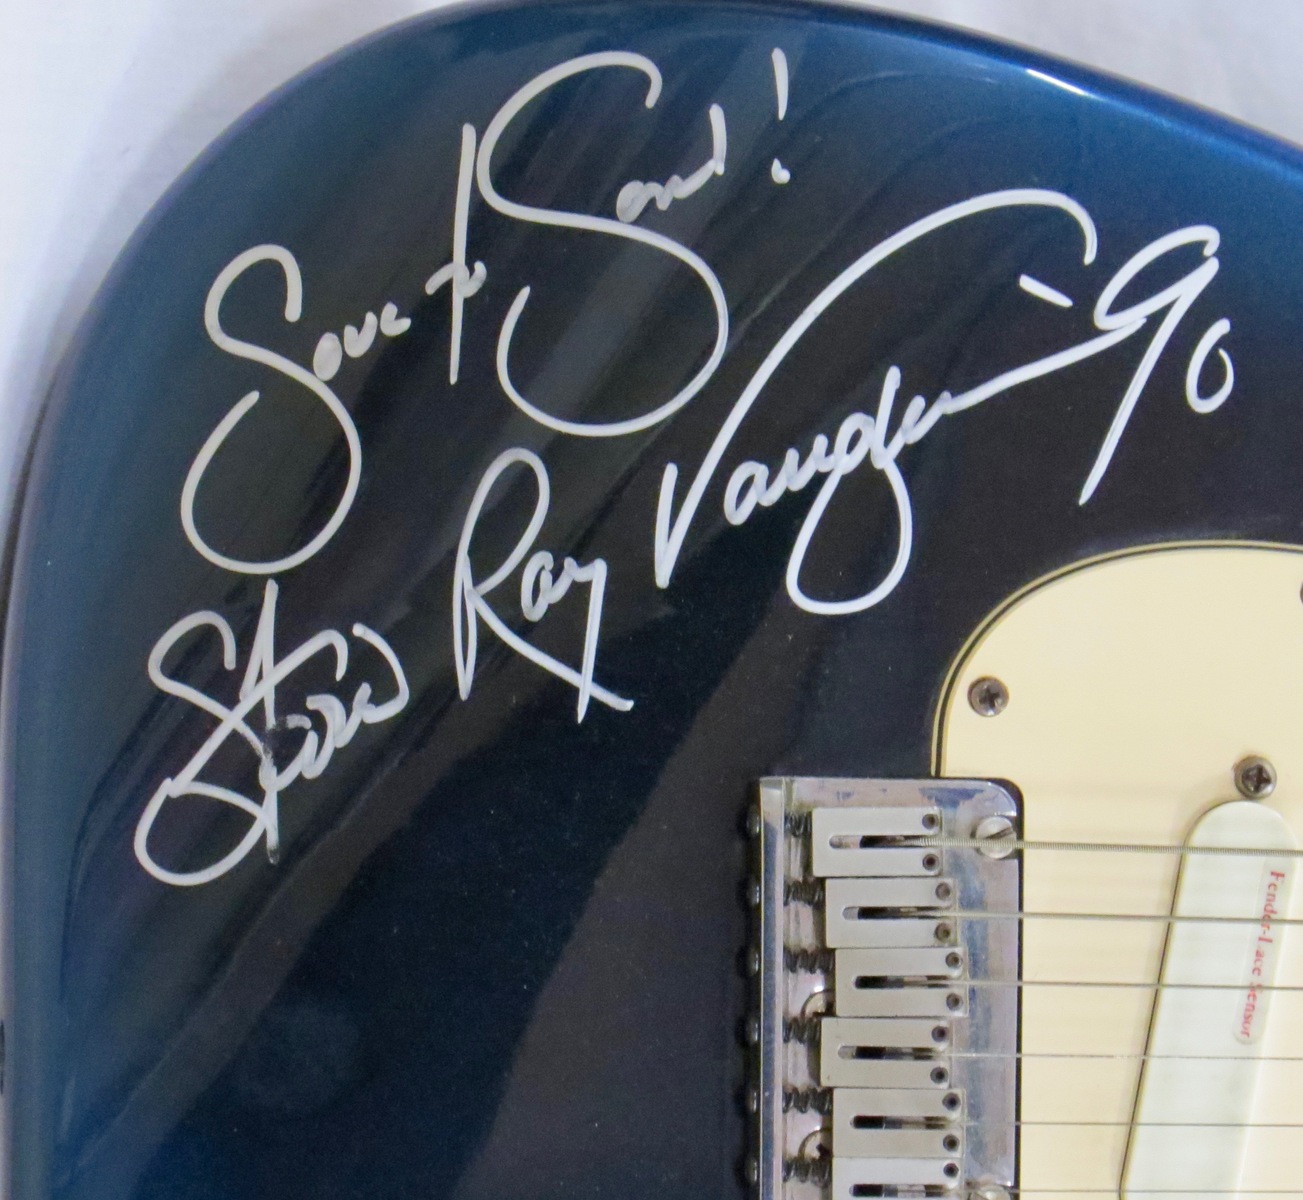 Blue Fender Stratocaster Guiitar Signed by Stevie Ray Vaughan